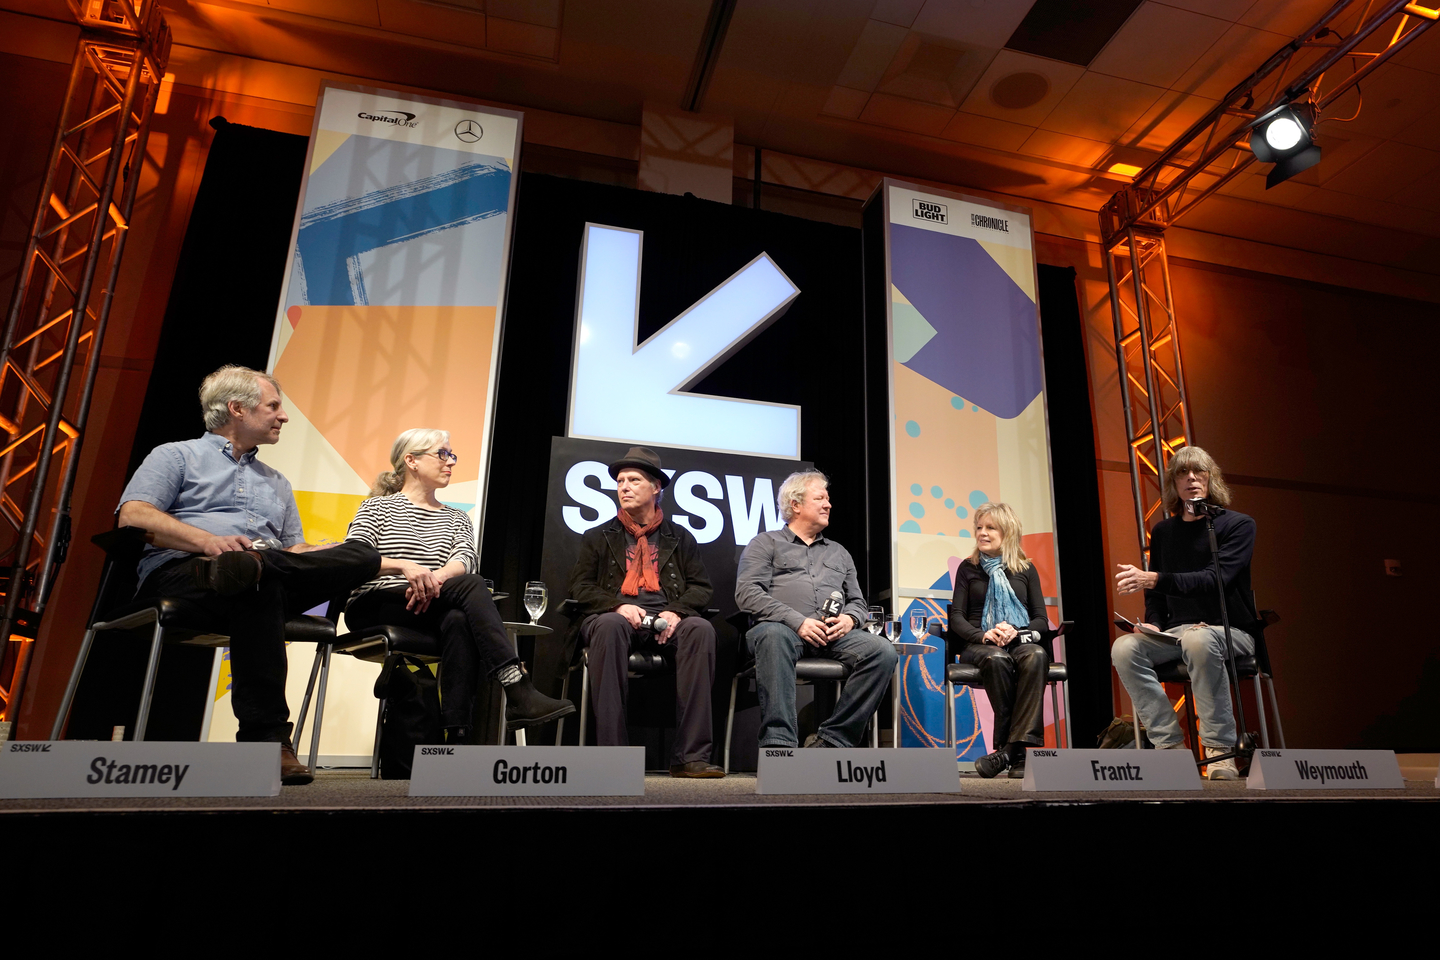 (L-R) Chris Stamey, Julia Gorton, Richard Lloyd, Chris Frantz and Tina Weymouth of Talking Heads, and David Fricke formed the panel for “From CBGB to the World: A Downtown Diaspora.” Photo by Ismael Quintanilla/Getty Images for SXSW